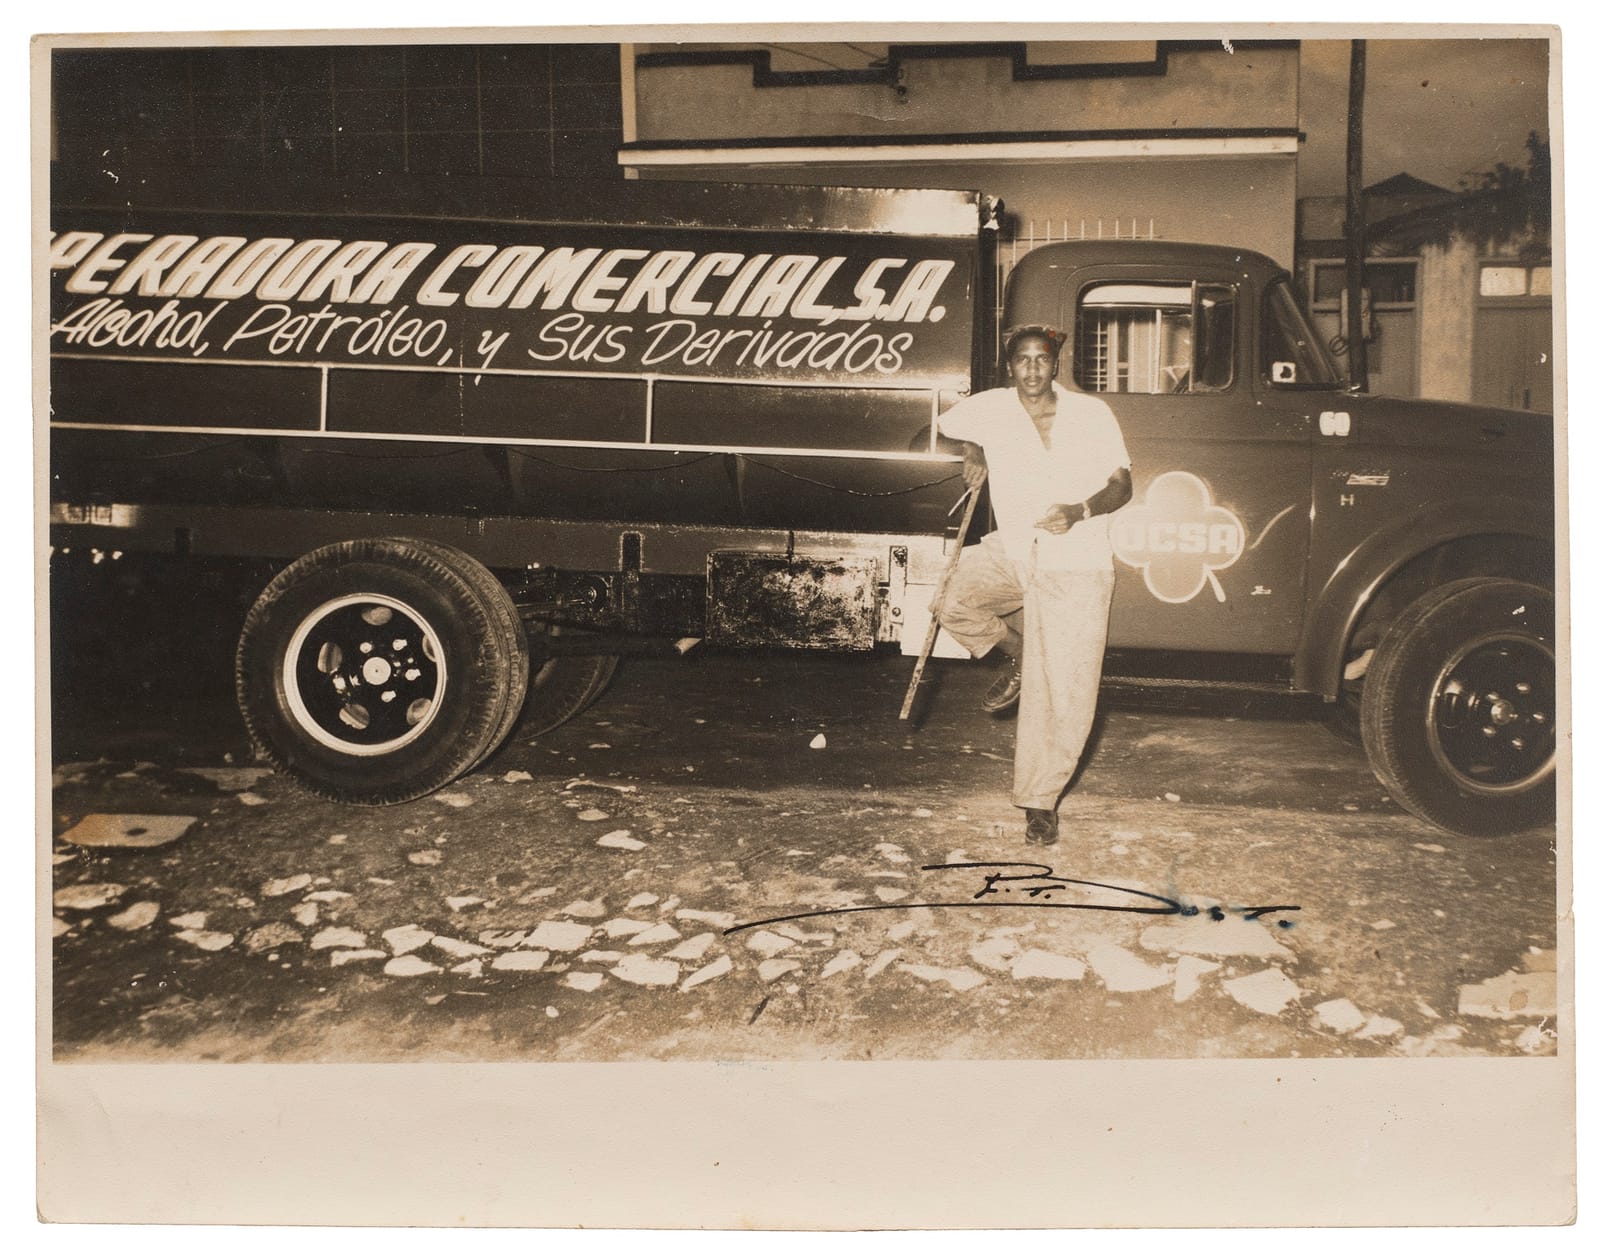 Smartly dressed man resting a foot on a lorry which is hand-lettered, and what is visible reads "...peradora Comercial S.A."